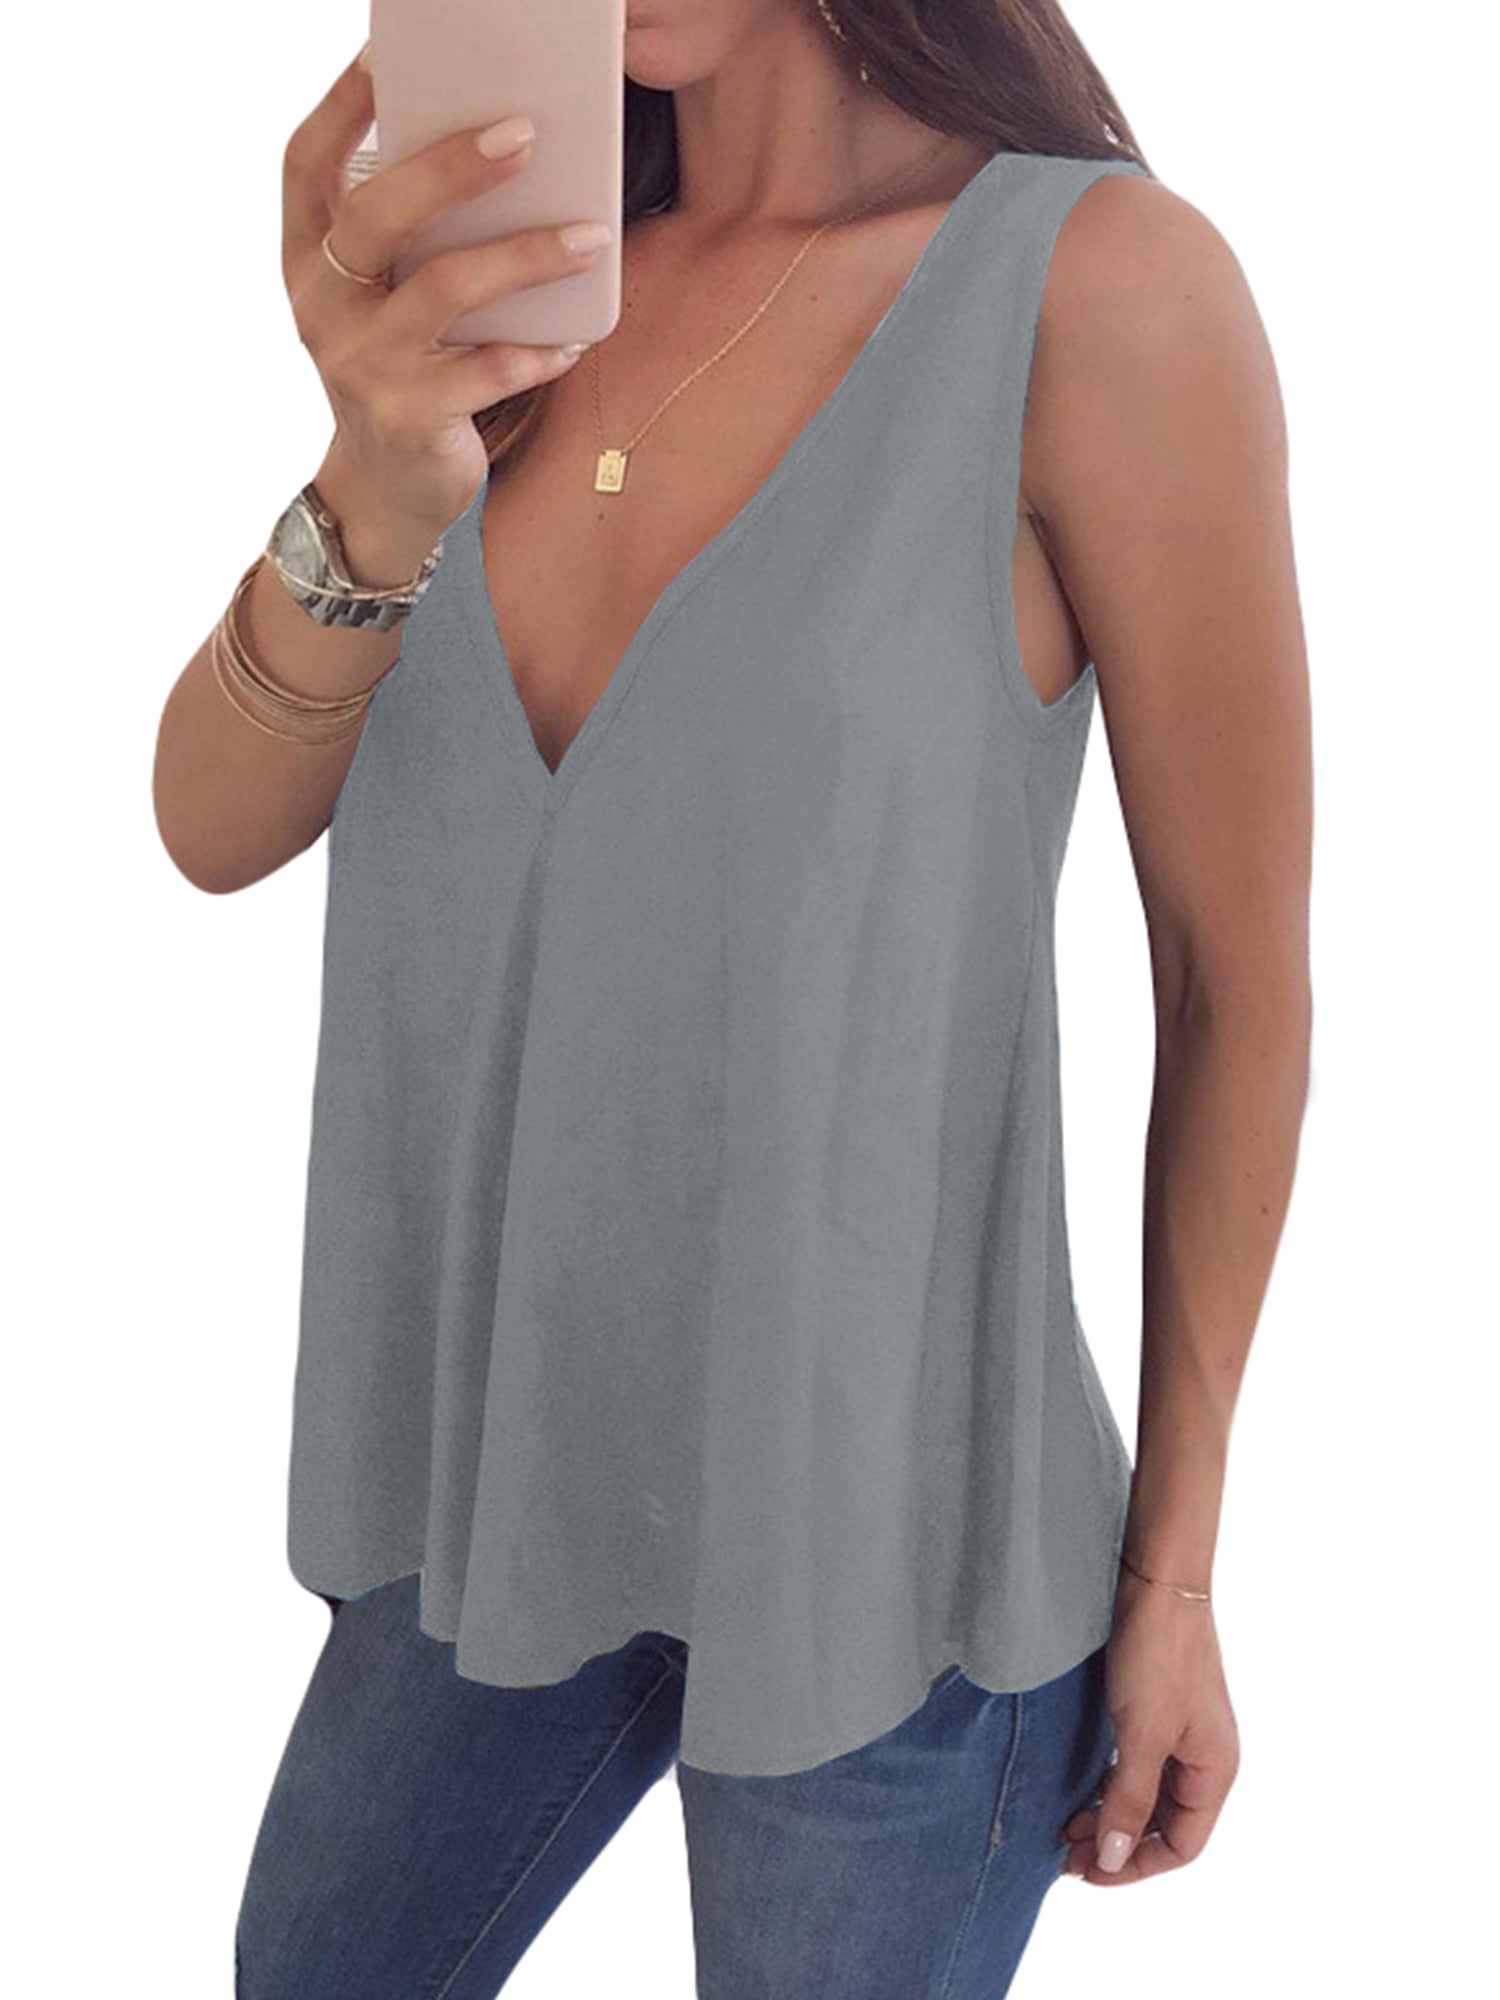 Women Tank Tops Loose Fit,Womens Tank Tops Plus Size Trendy V Neck Sleeveless Tank Top Shirts Gradient Loose Fit Tees 